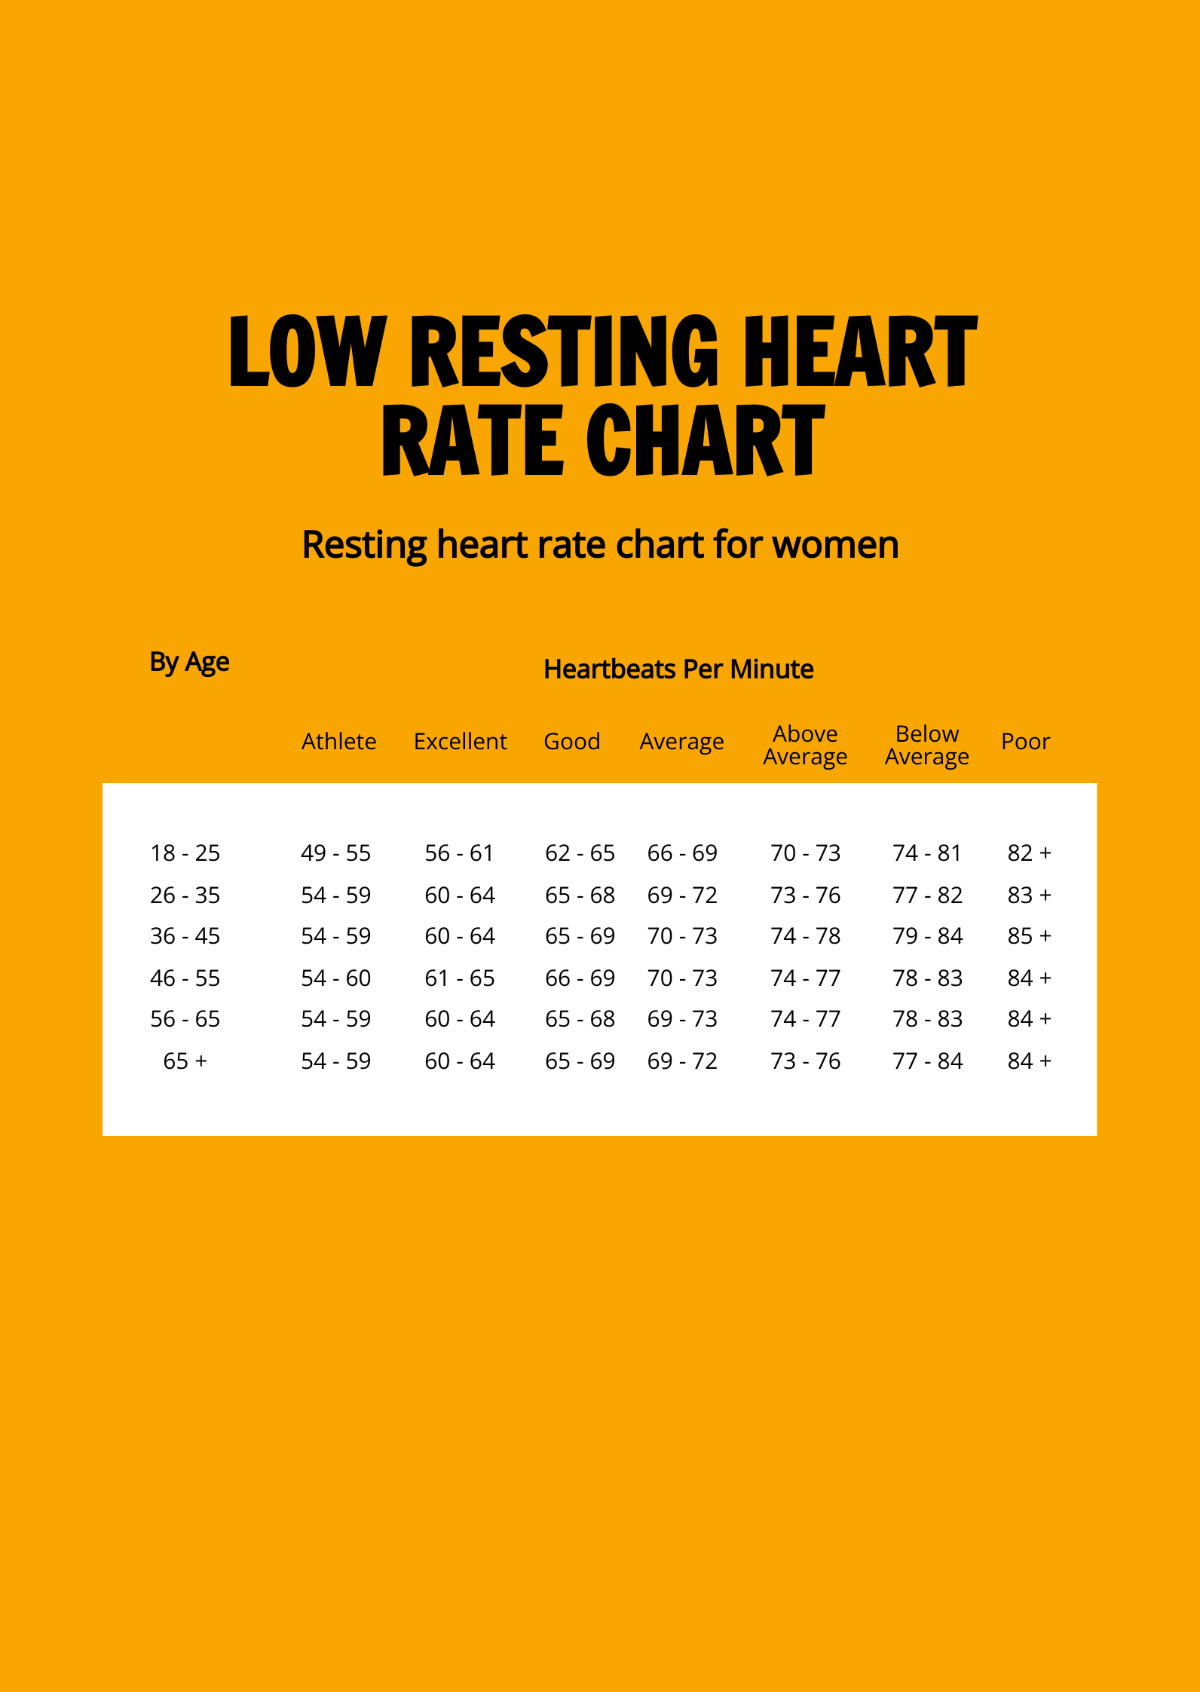 Low Resting Heart Rate Chart